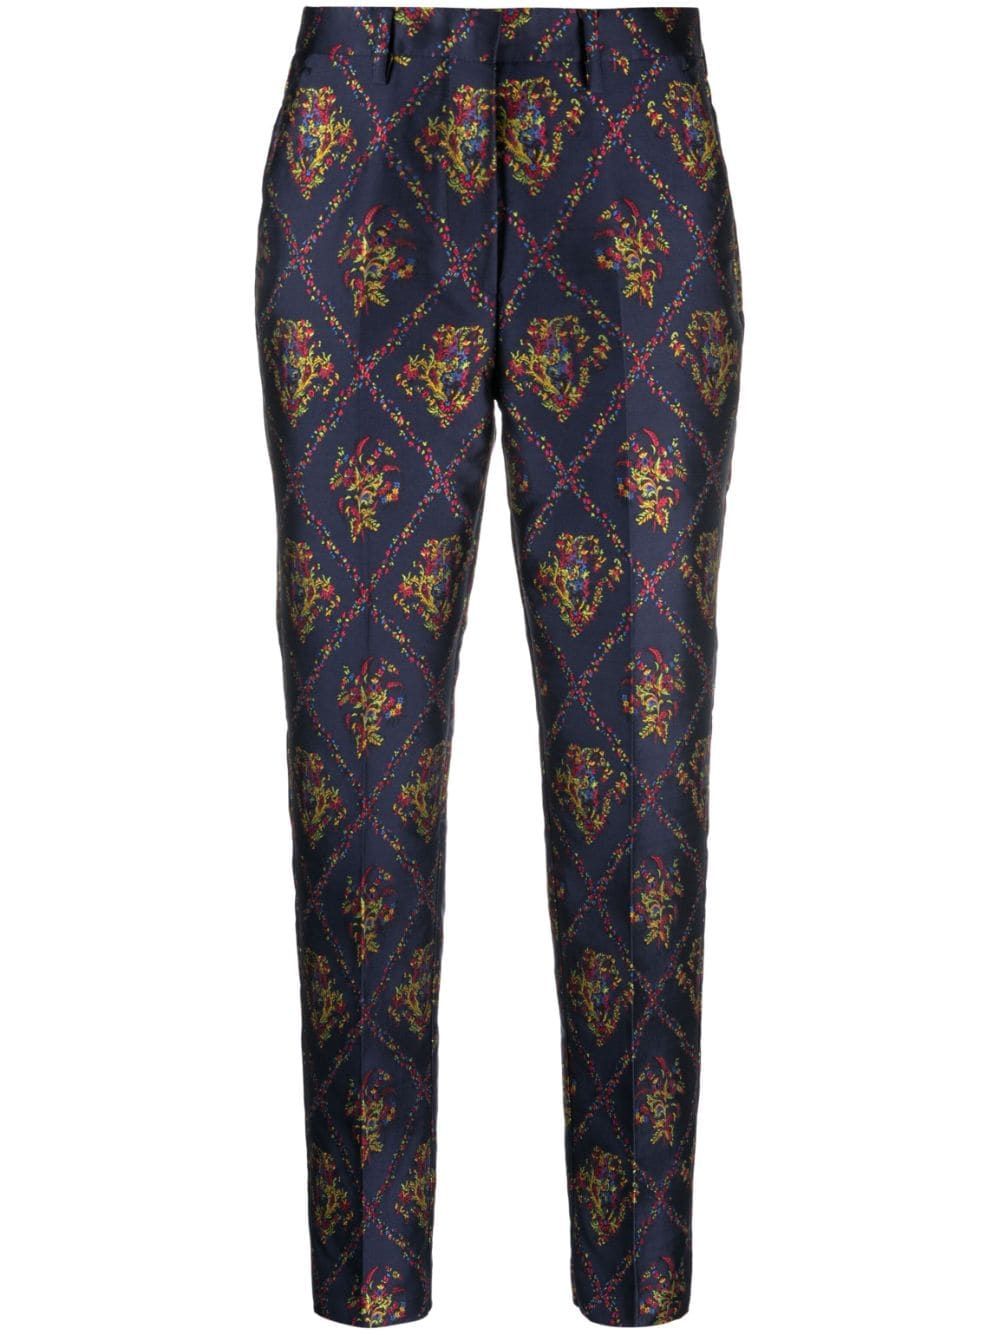 ETRO Multicolored Women's Pants for FW23